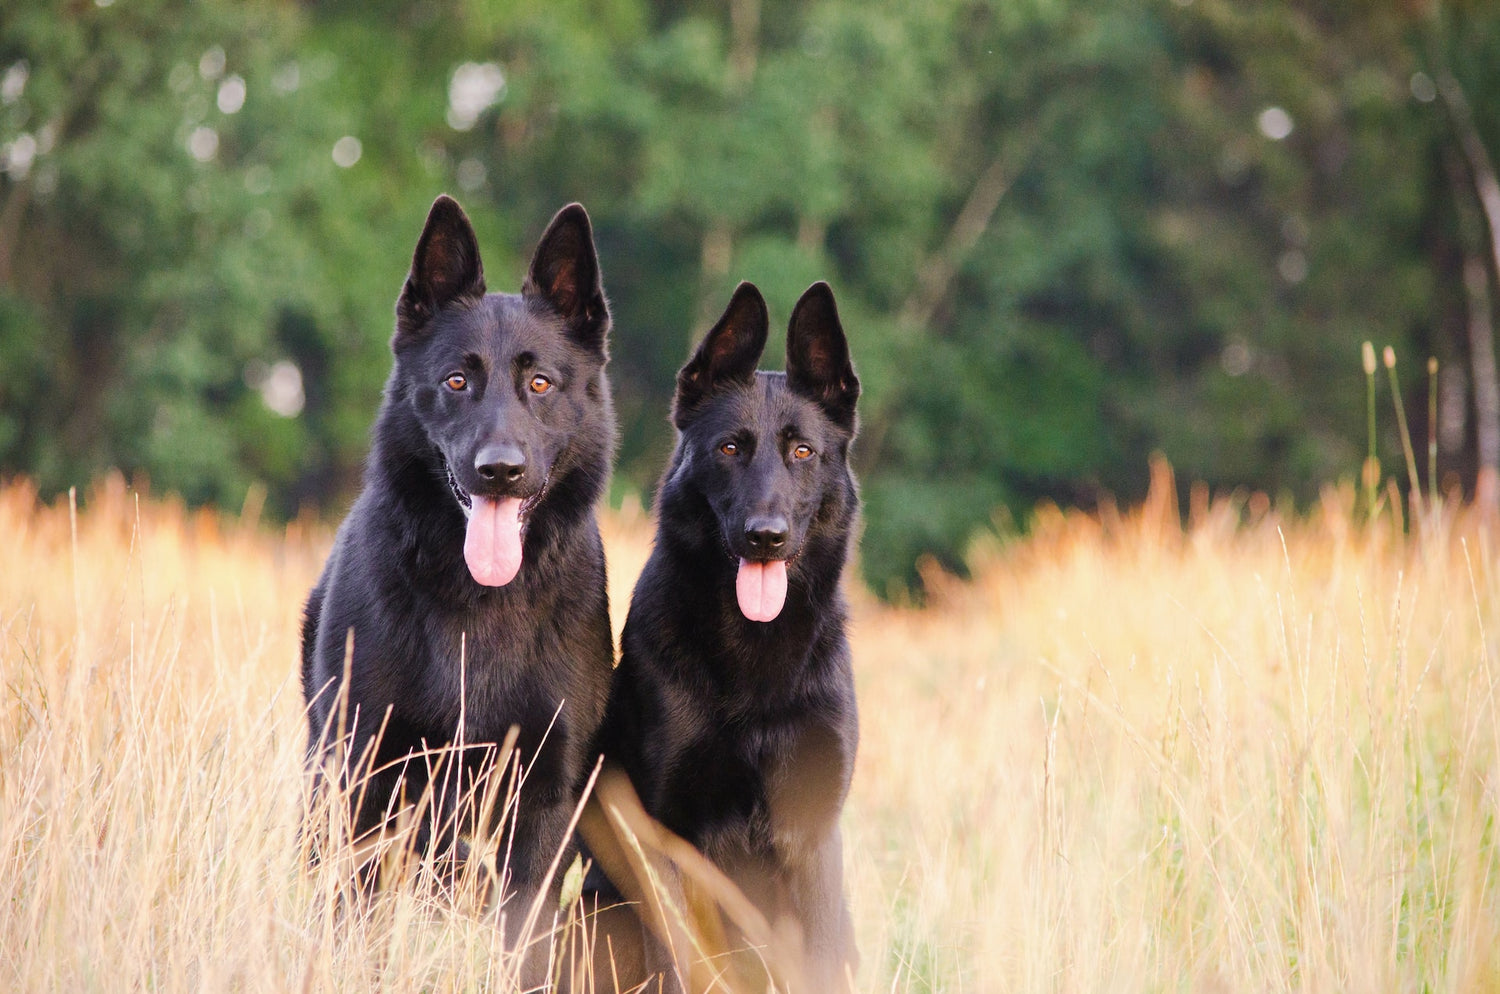 Two beautiful German Shepherd dogs with healthy skin and coats from Vitamin E supplements